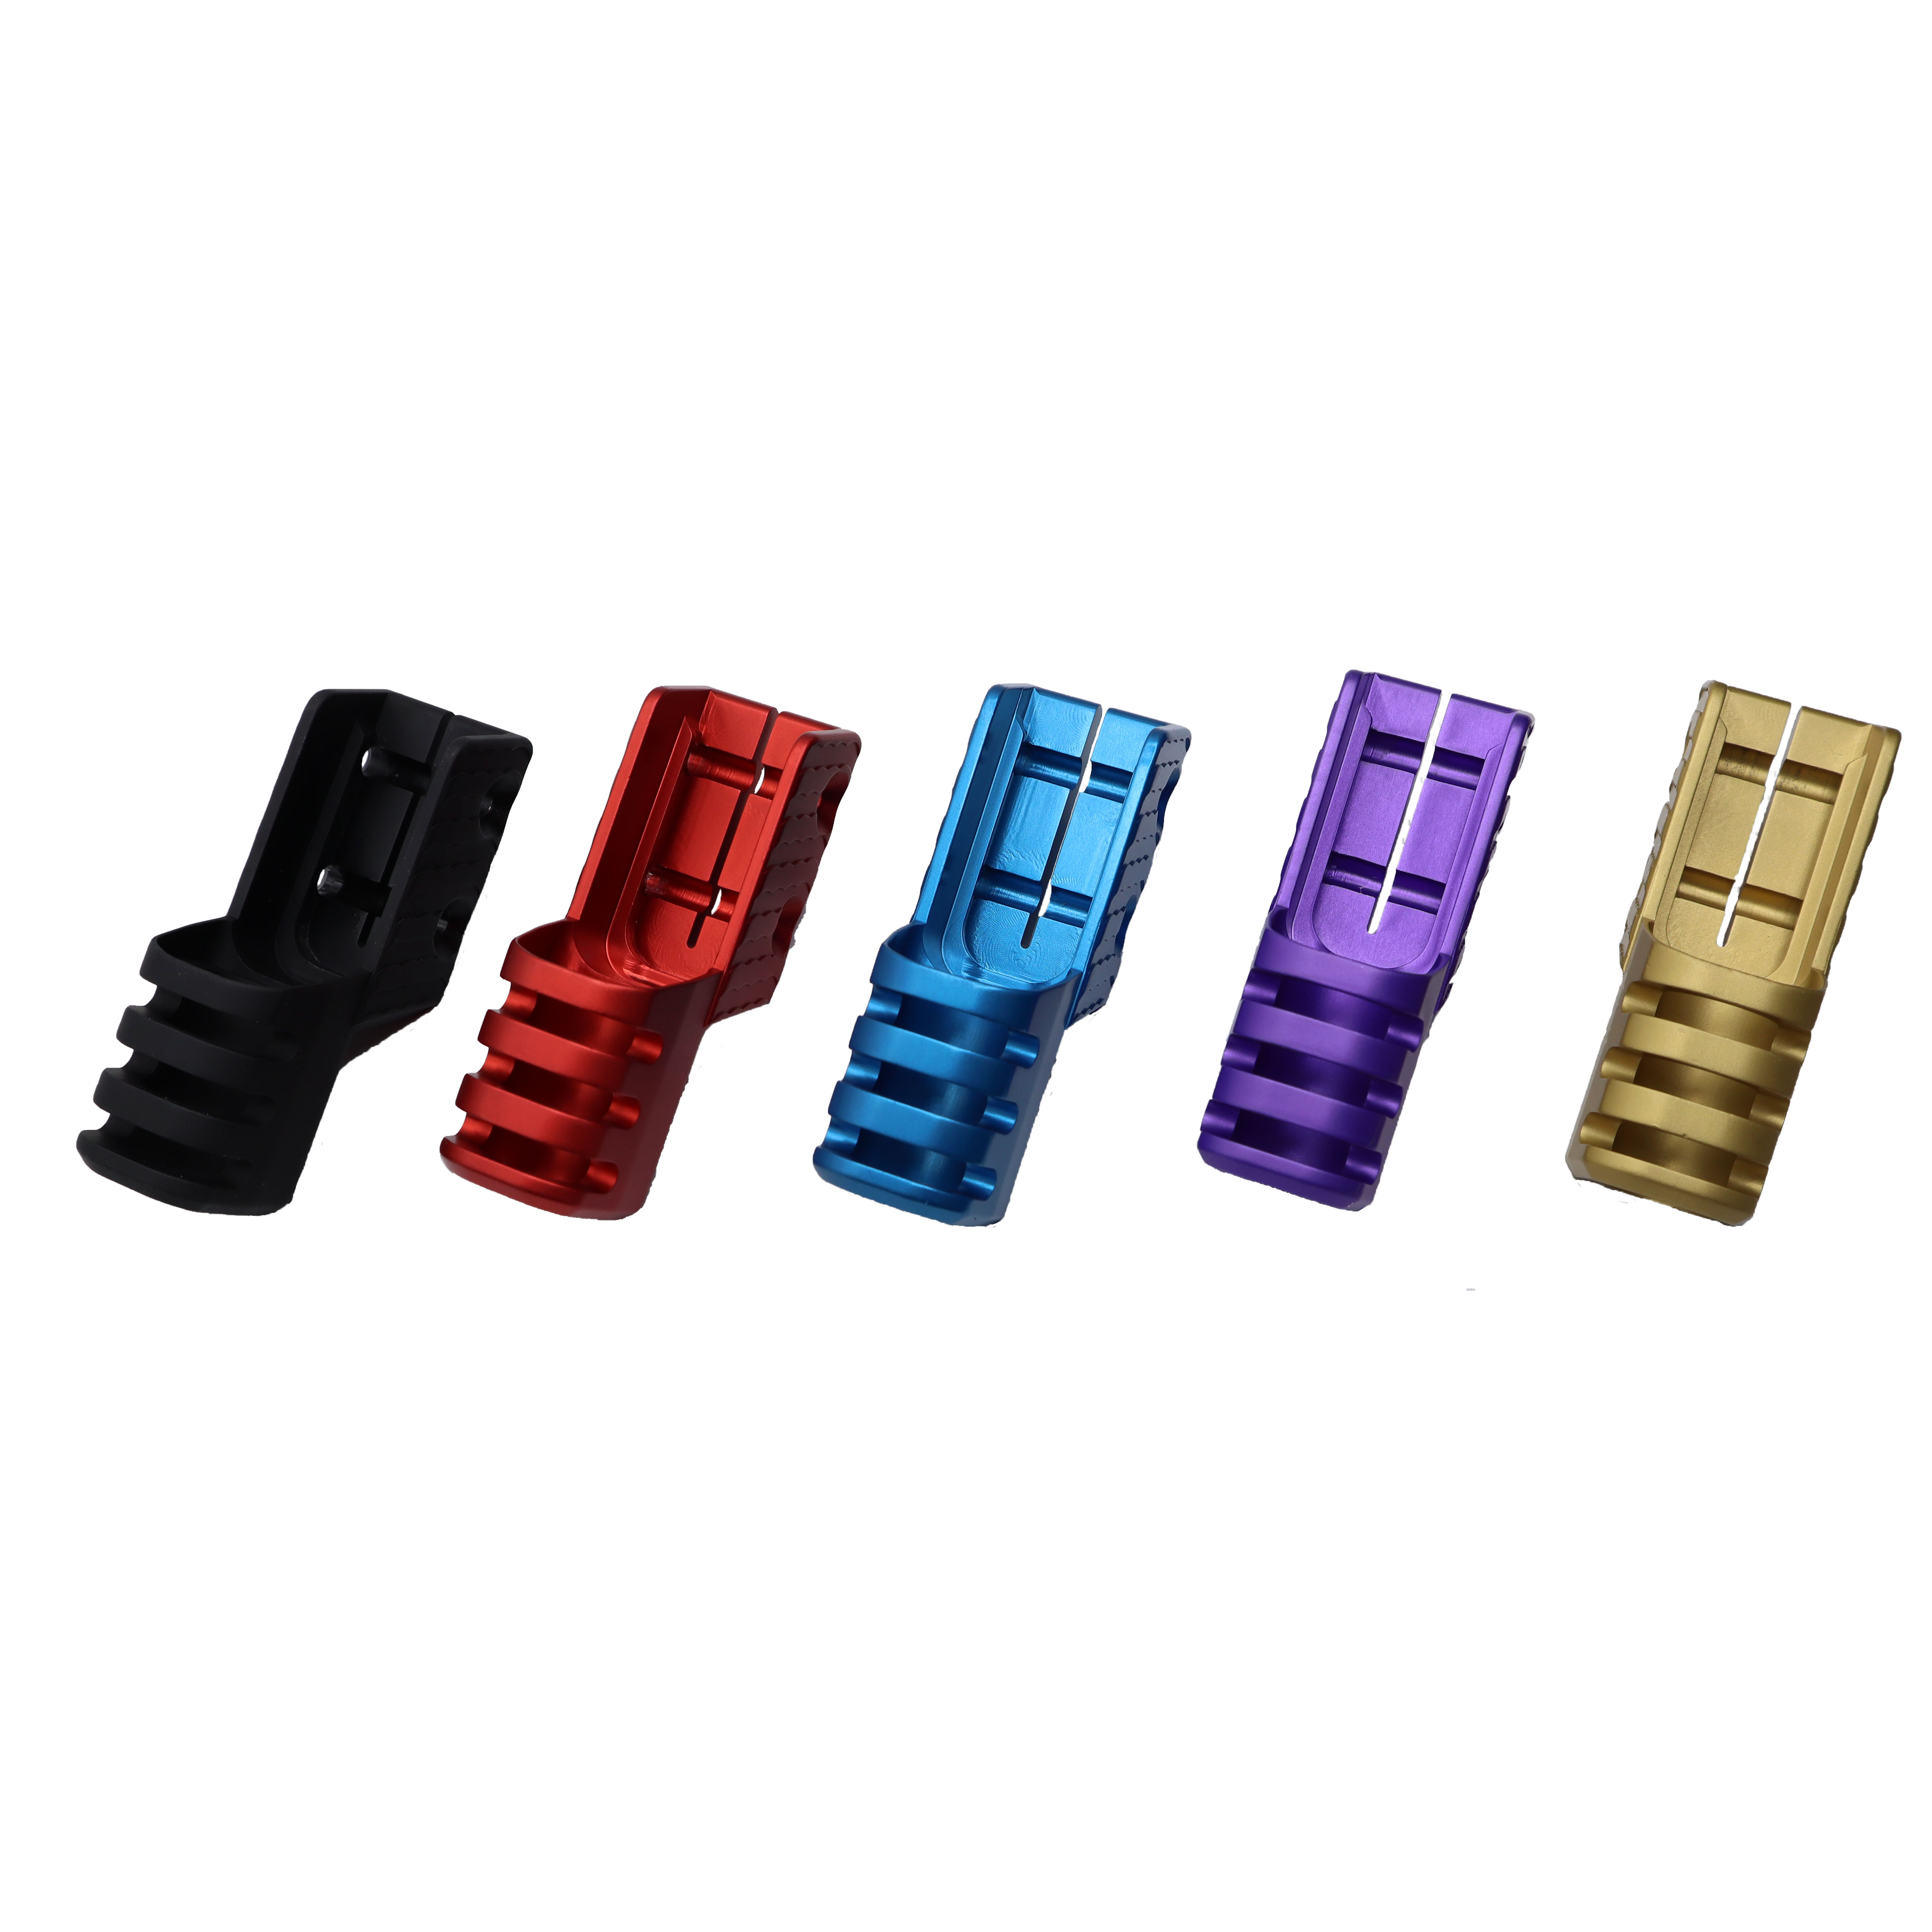 does this compensator work on the equalizer 9mm model?